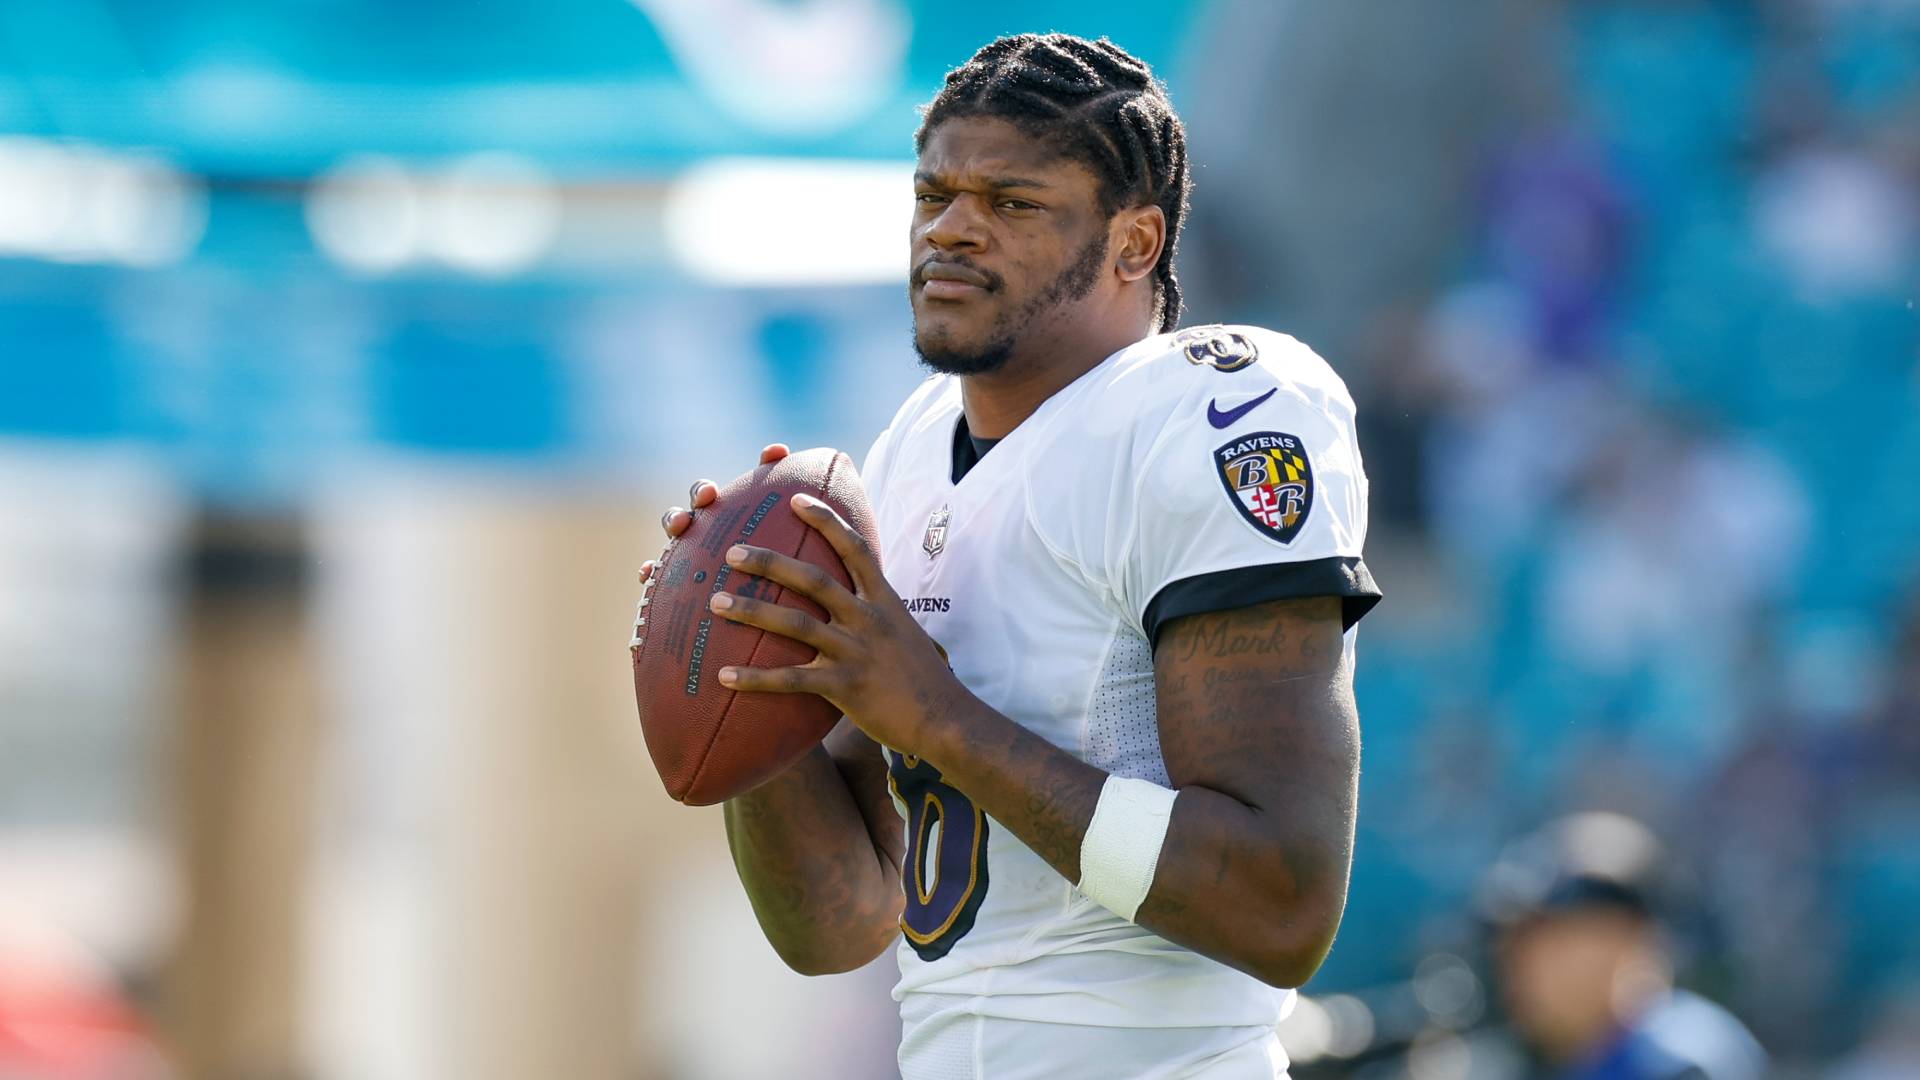 Sadly: Lamar Jackson has not been relating with the team officials due to is current situation on…….Read more